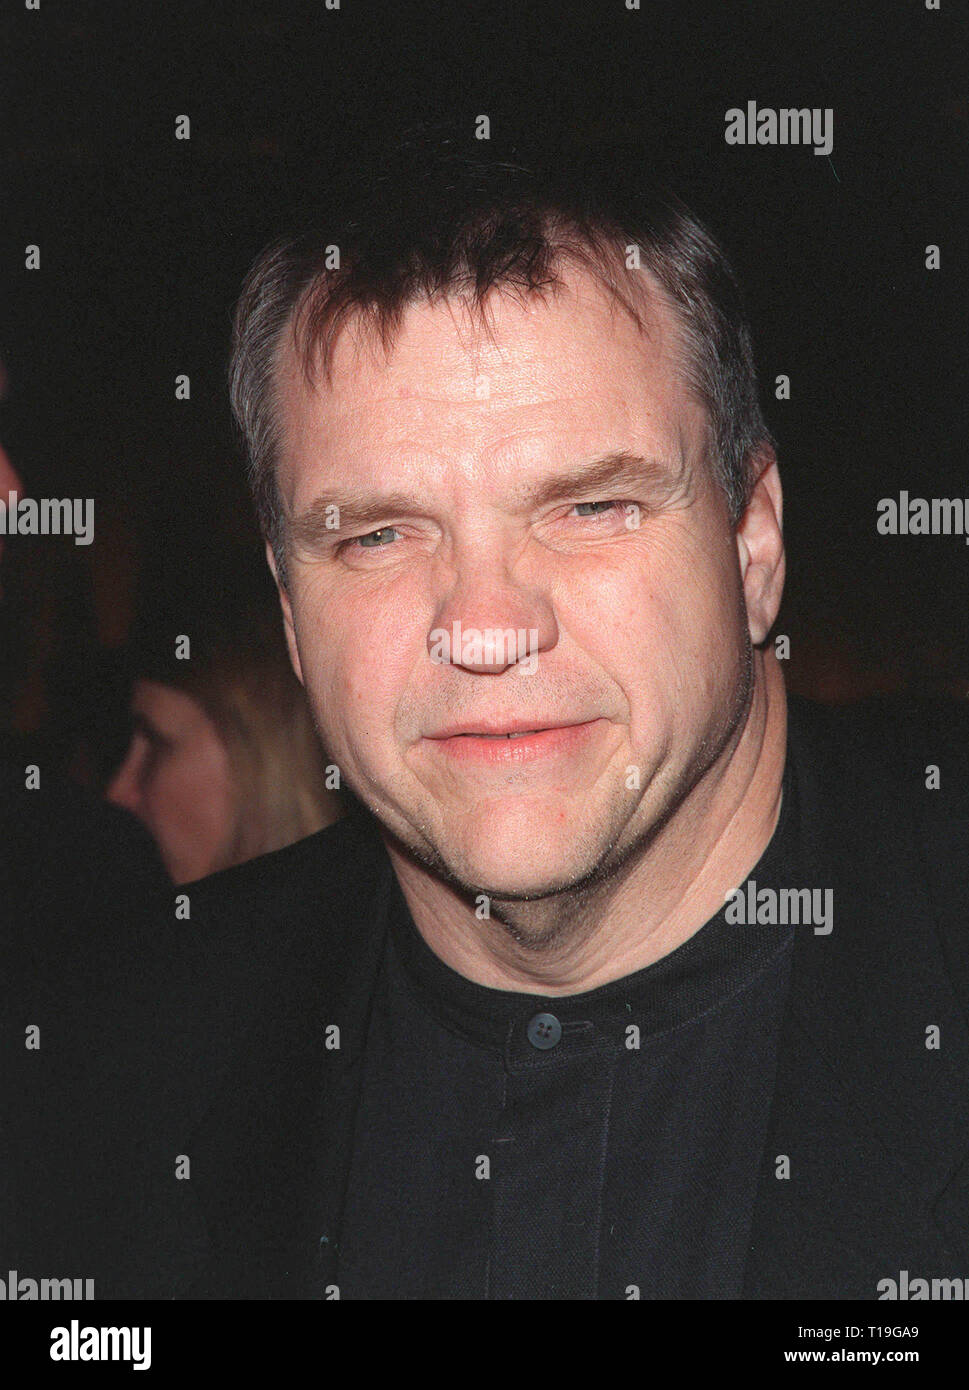 LOS ANGELES, CA - October 8, 1998: Singer/actor MEAT LOAF at the Los Angeles premiere of his new movie 'The Mighty' in which he stars with Sharon Stone & Gillian Anderson. Stock Photo